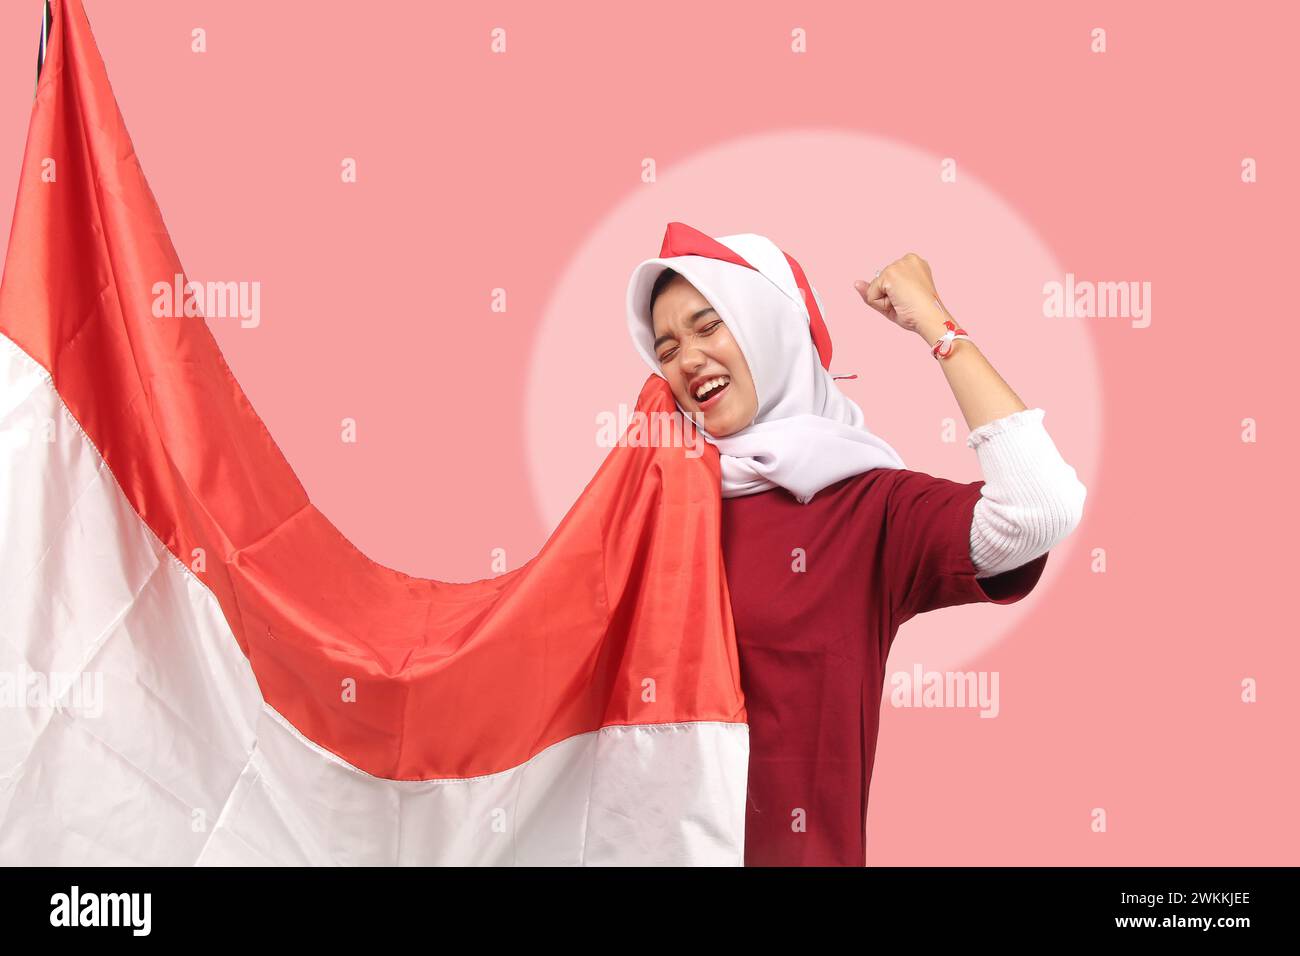 young asian woman celebrating happy independence of republic of indonesia in red and white satin with smiling expression on pink background, clipping Stock Photo